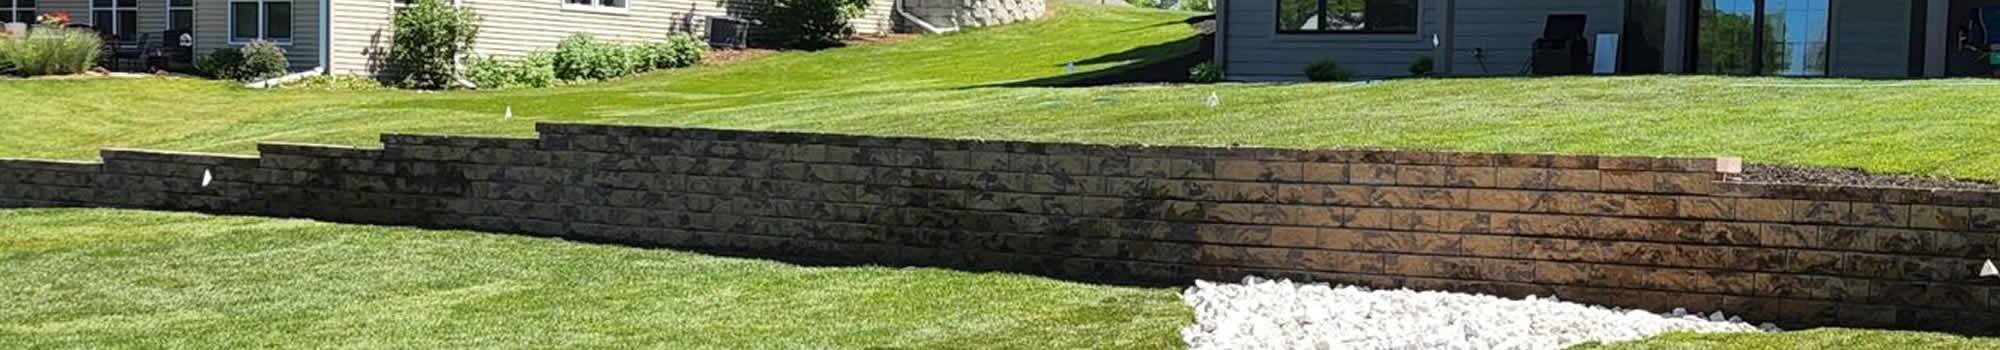 Landscape Maintenance Services in Plymouth